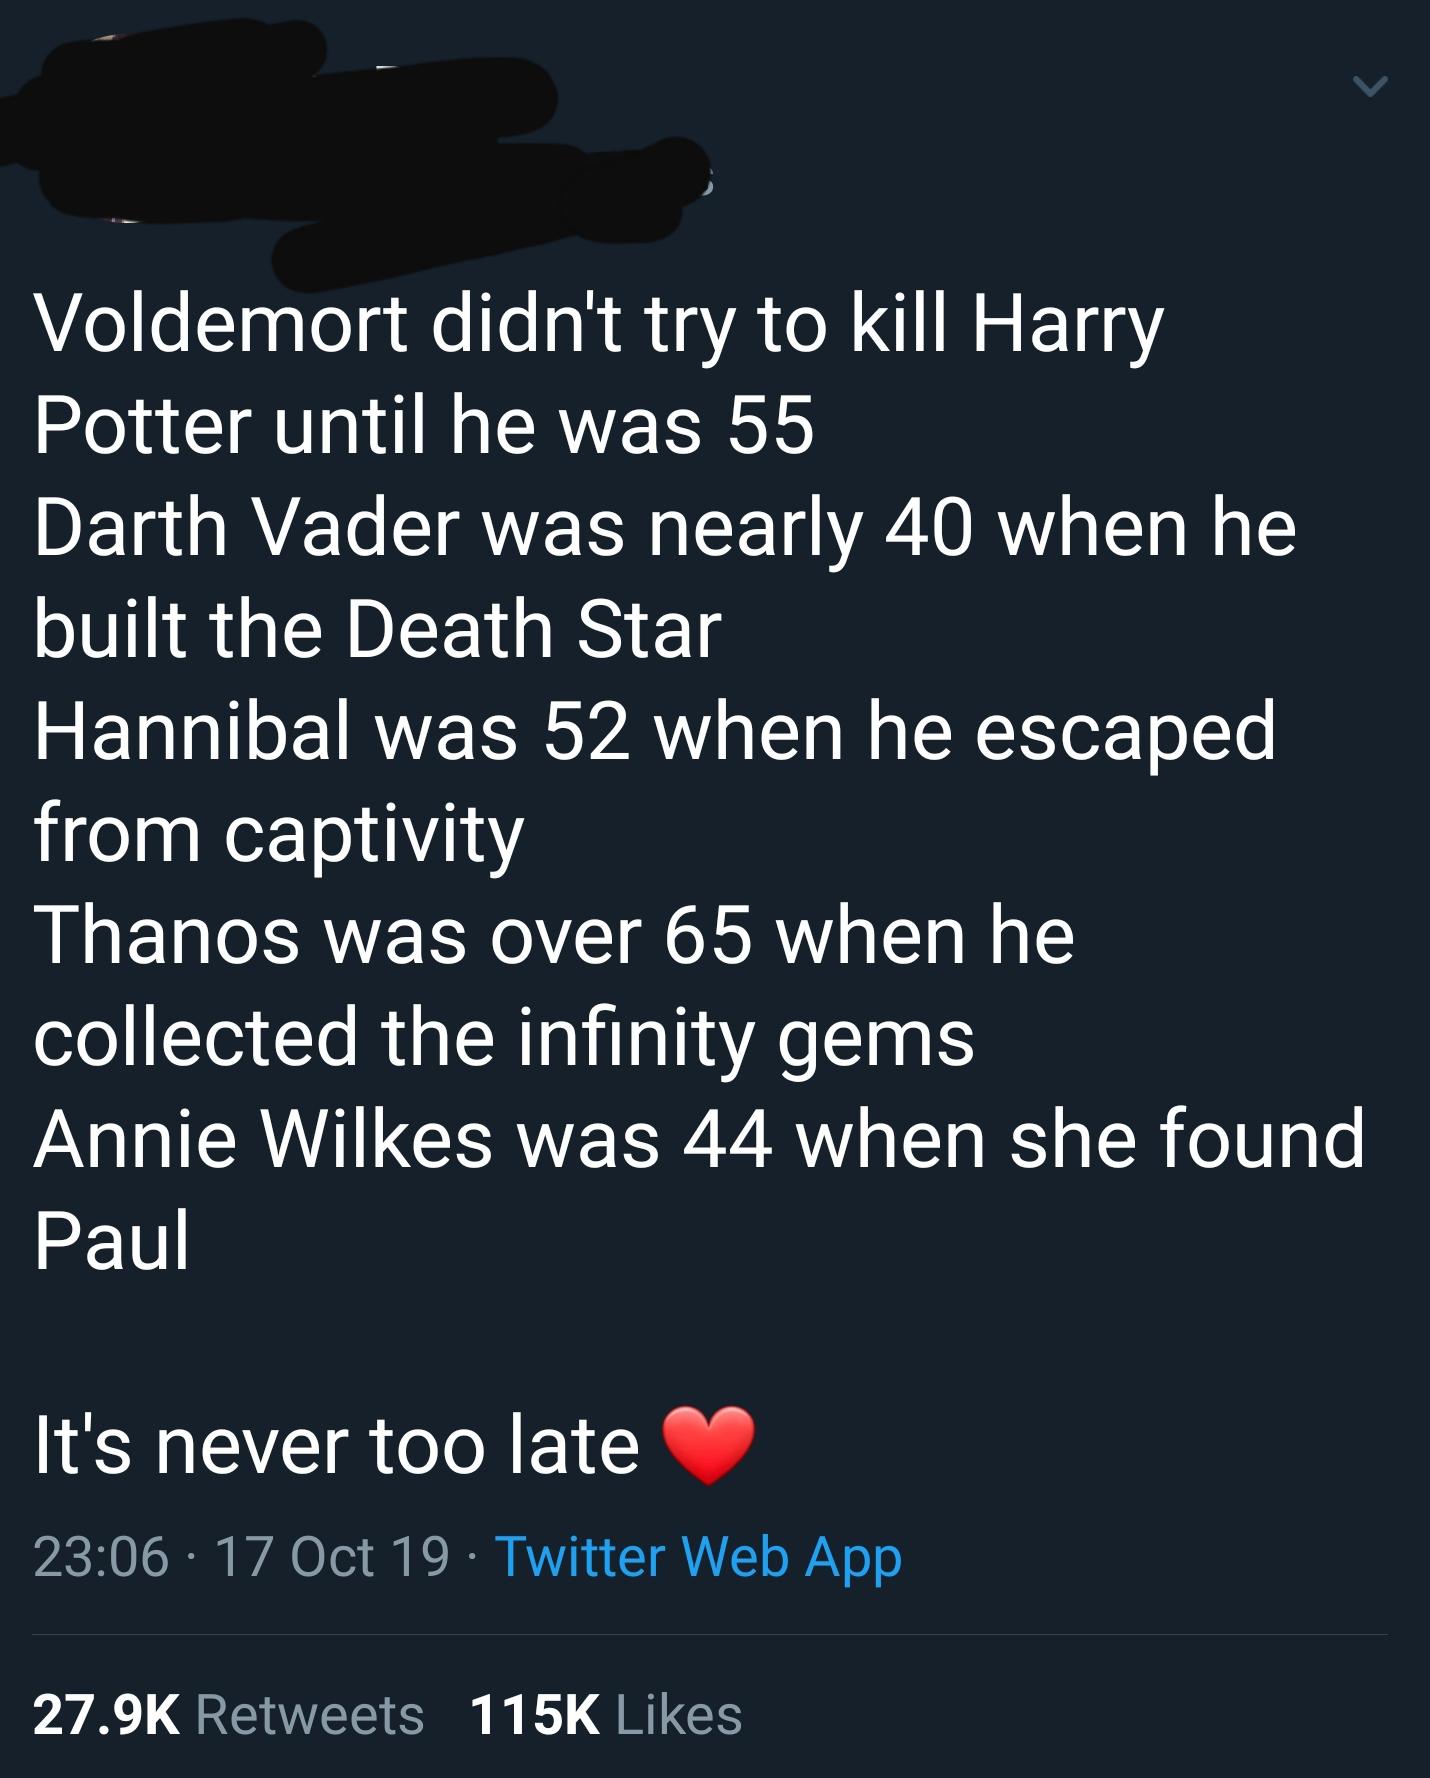 cute wholesome-memes cute text: Voldemort didn't try to kill Harry Potter until he was 55 Darth Vader was nearly 40 when he built the Death Star Hannibal was 52 when he escaped from captivity Thanos was over 65 when he collected the infinity gems Annie Wilkes was 44 when she found Paul It's never too late 23:06 • 17 Oct 19 • Twitter Web App Likes 27.9K Retweets 115K 